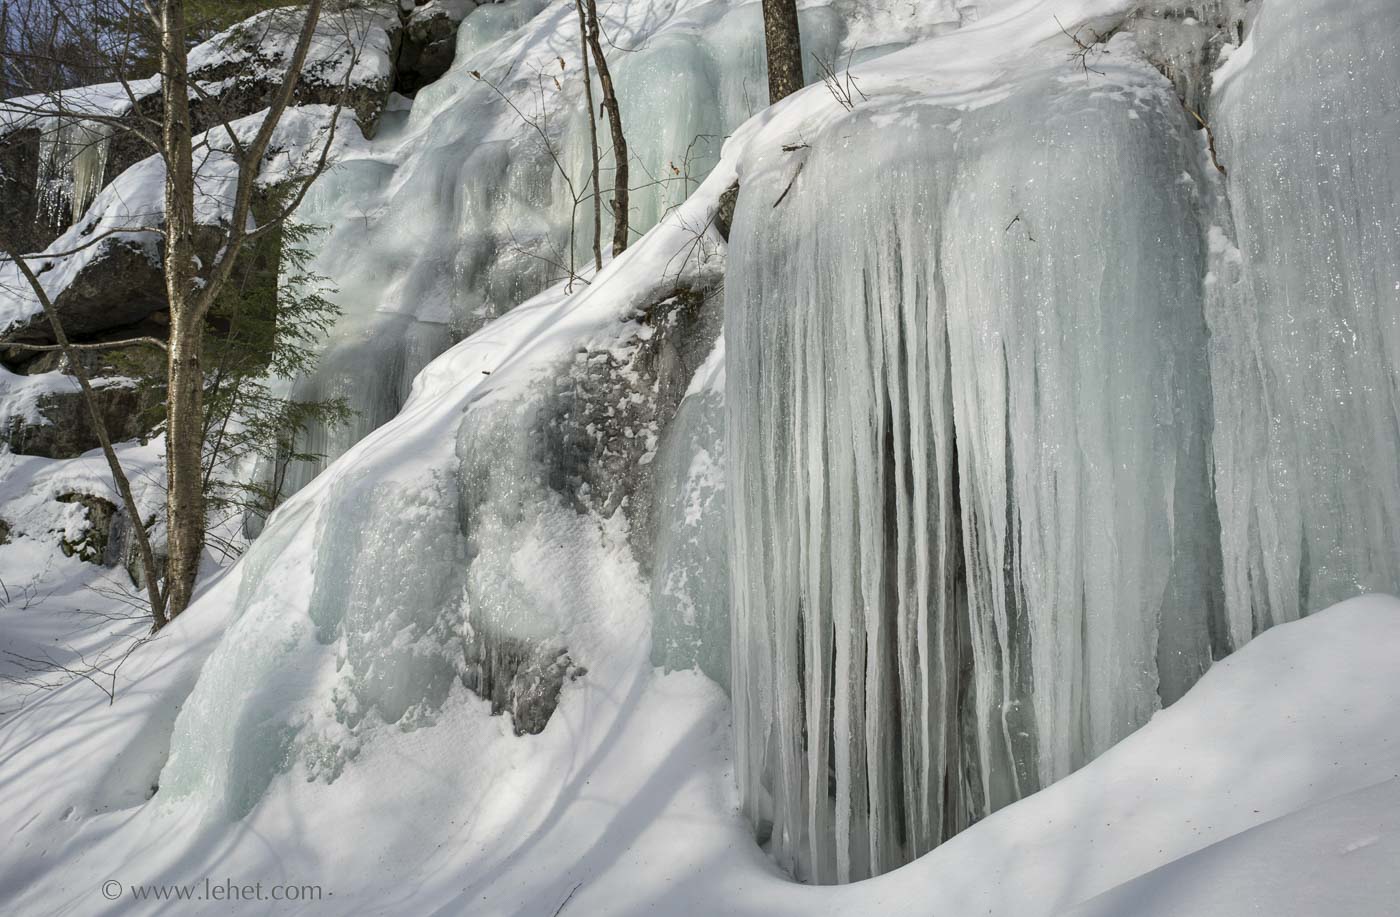 Icicles on Cliff, Mt Ascutney Vermont